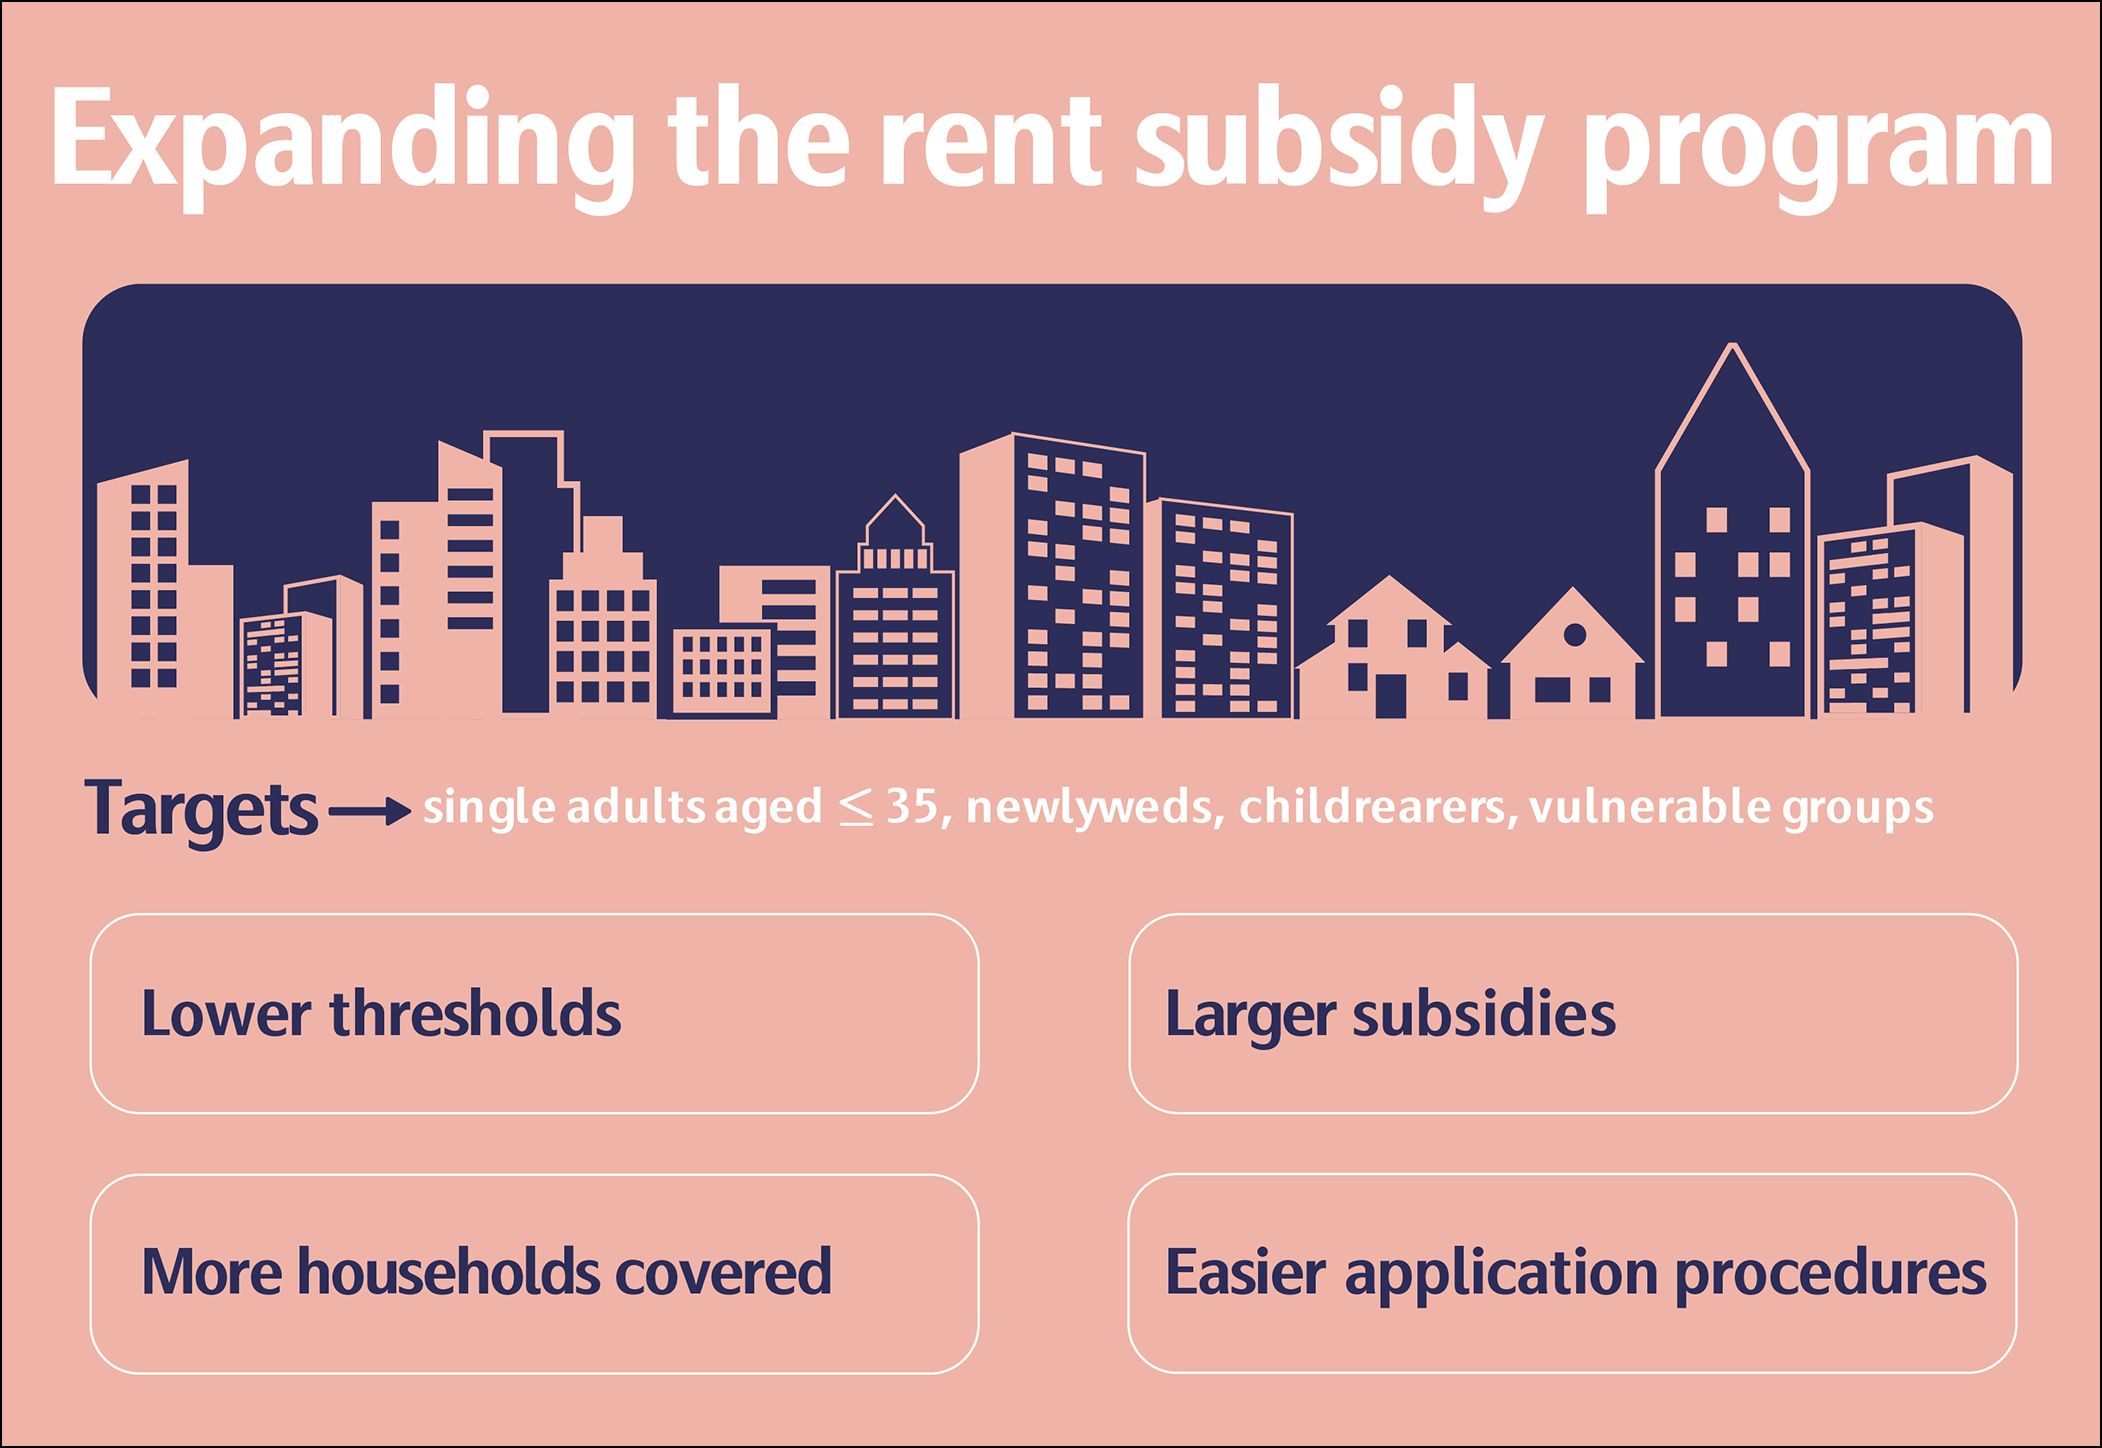 Expanding the rent subsidy program